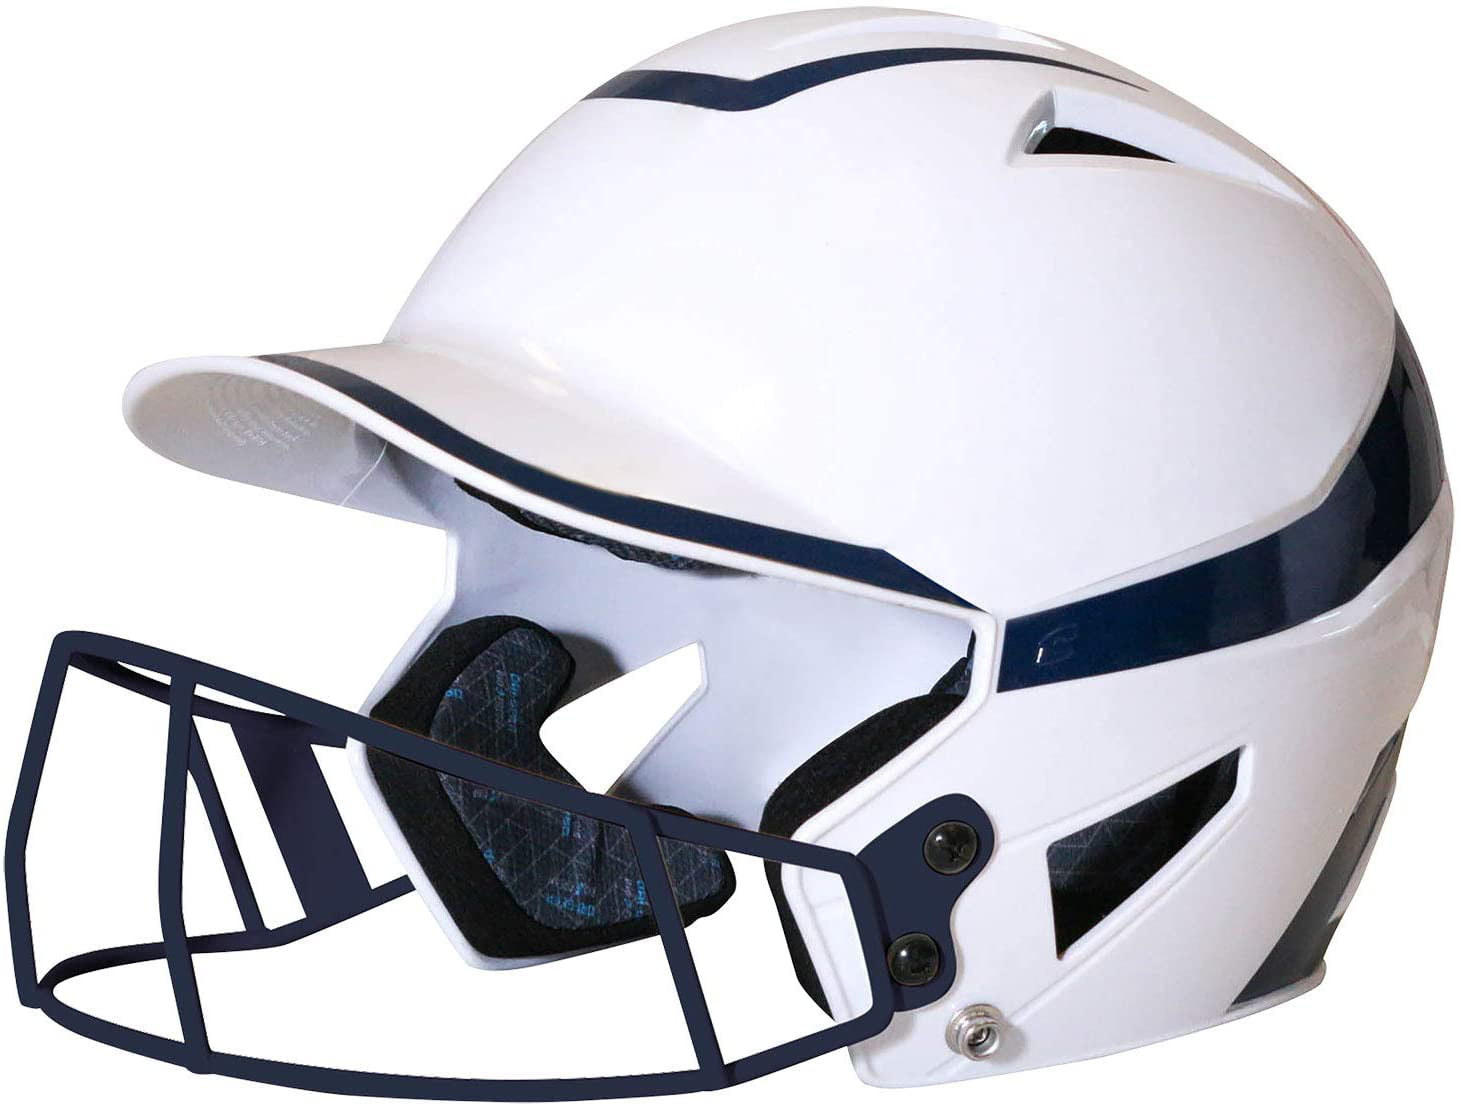 CHAMPRO HX Rise Pro Fastpitch Softball Batting Helmet with Facemask in  Two-Tone Color Glossy Finish, White, Navy, Junior, Model Number:  HXFPG2NYJ,.., 